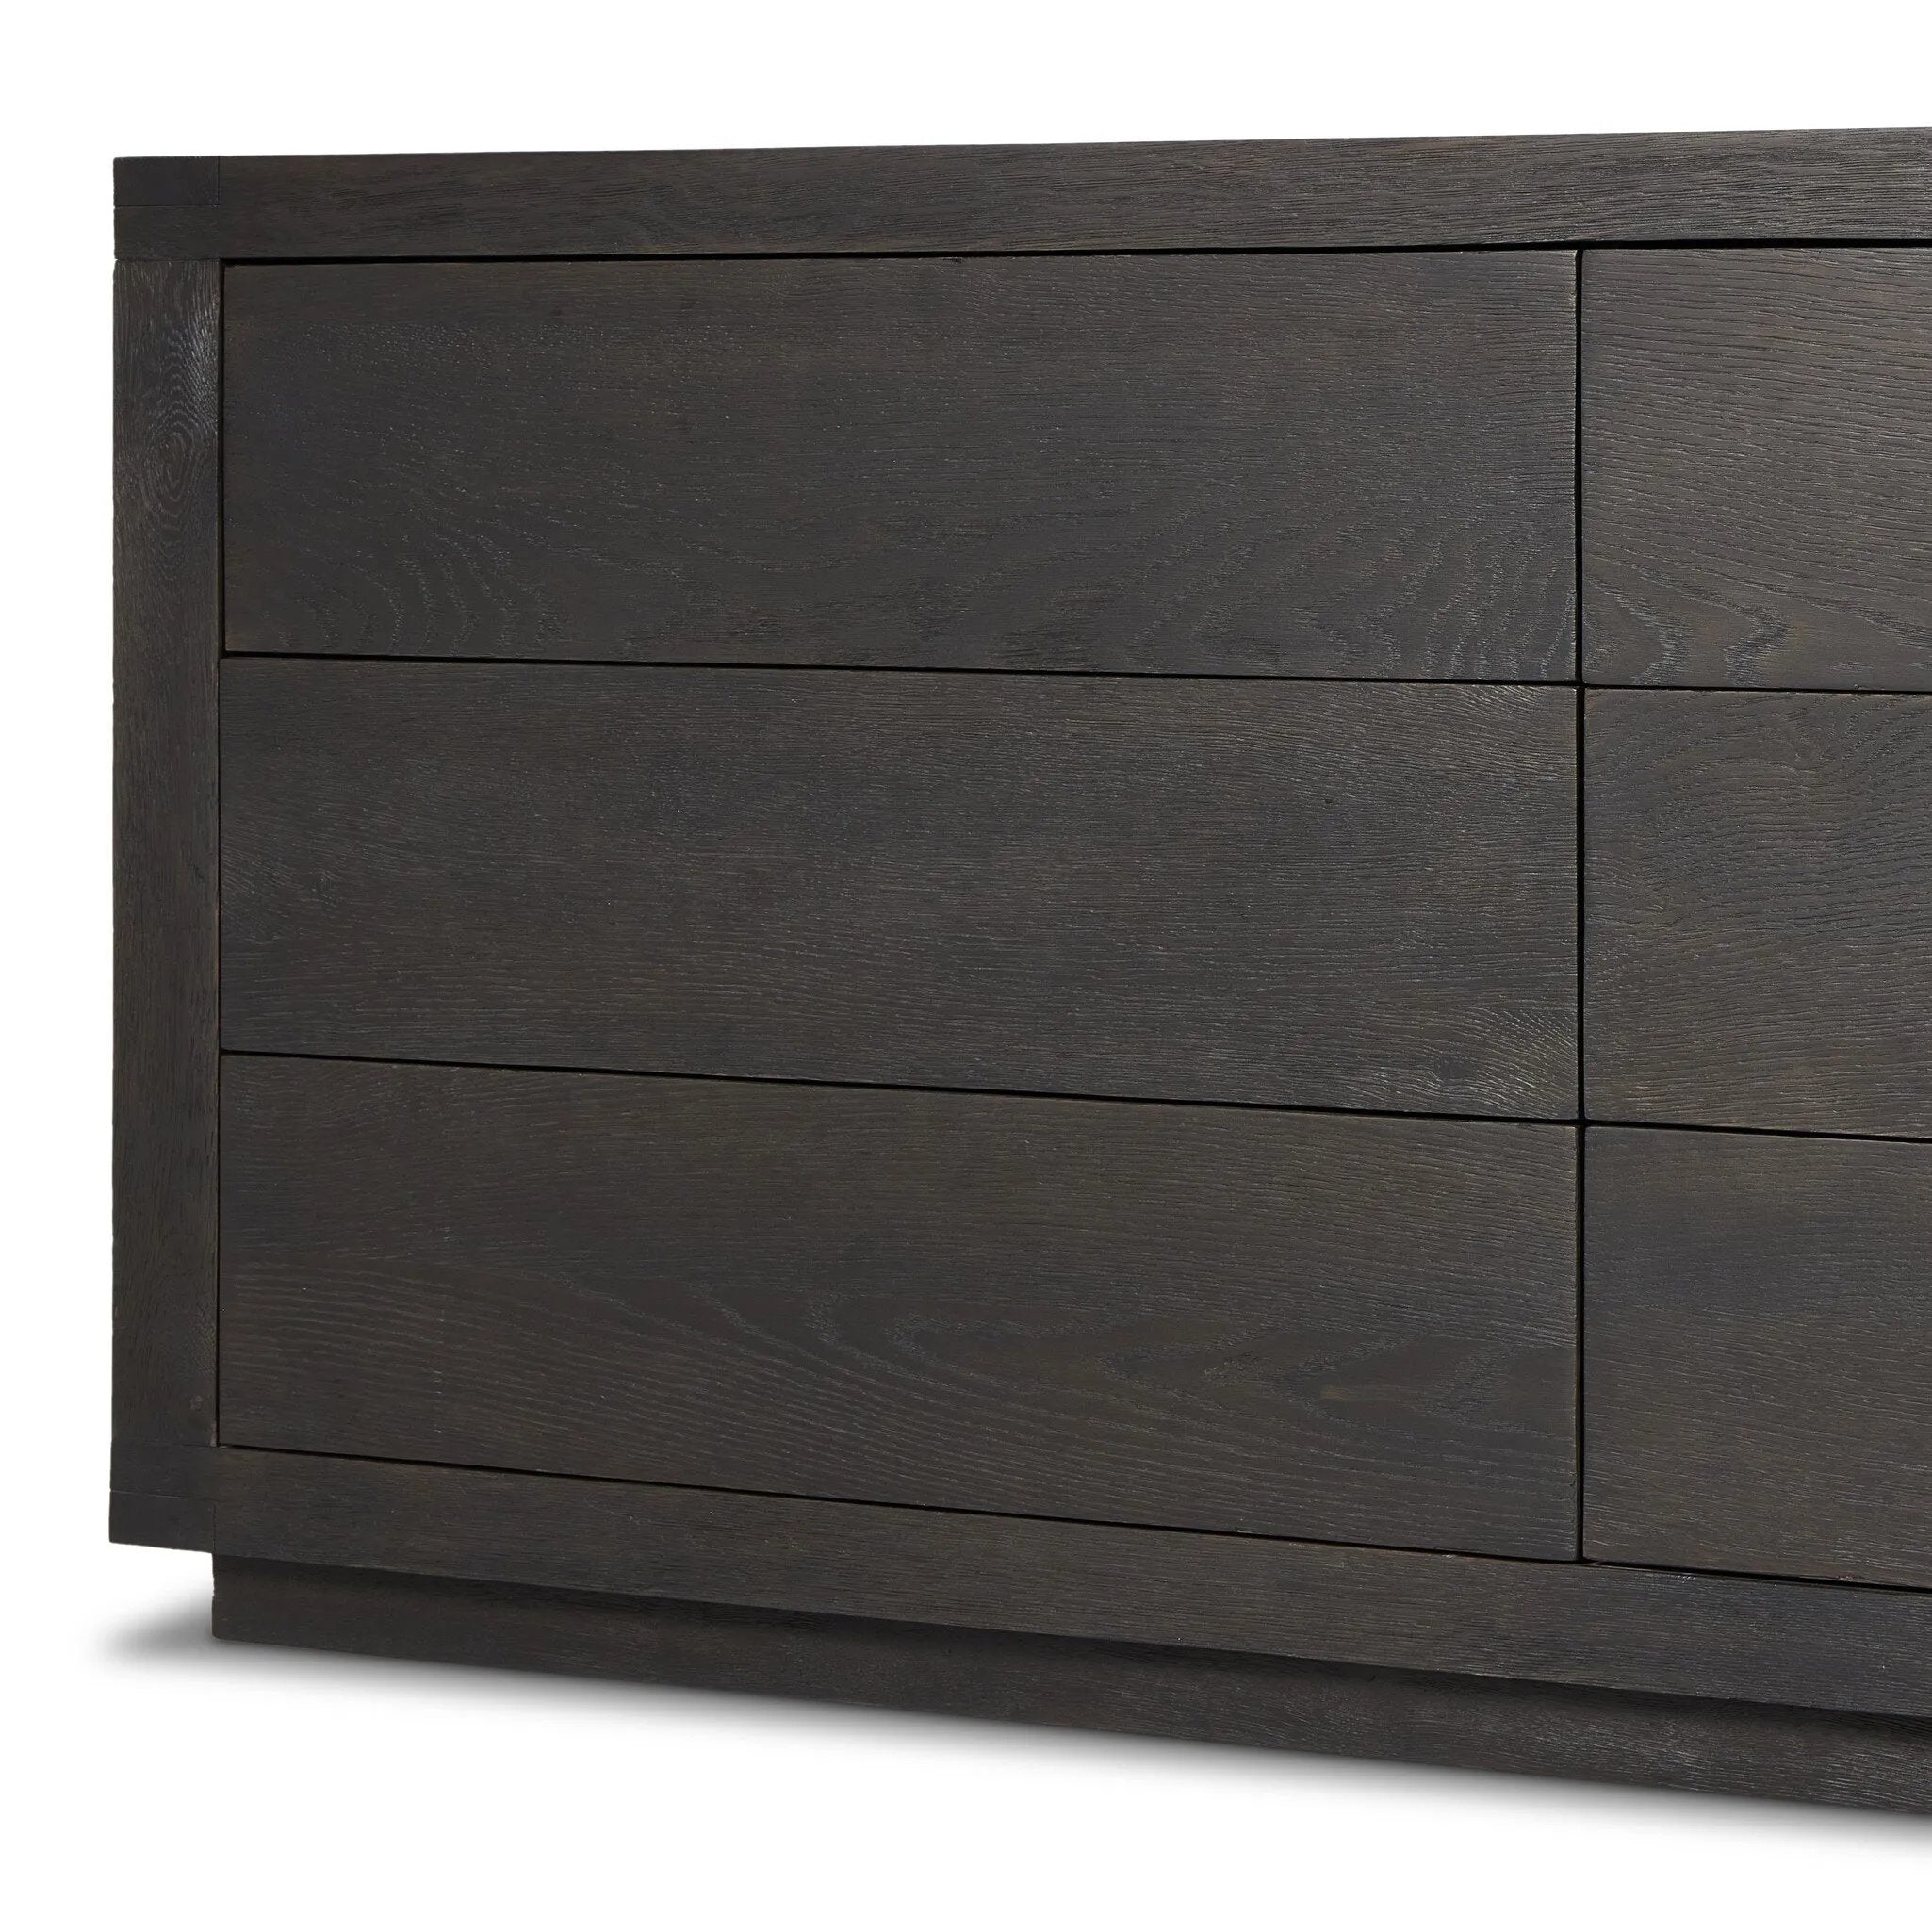 Black-finished oak shapes a streamlined box-style dresser, with lap joint corners for a detail-driven touch.Collection: Bennet Amethyst Home provides interior design, new home construction design consulting, vintage area rugs, and lighting in the Des Moines metro area.